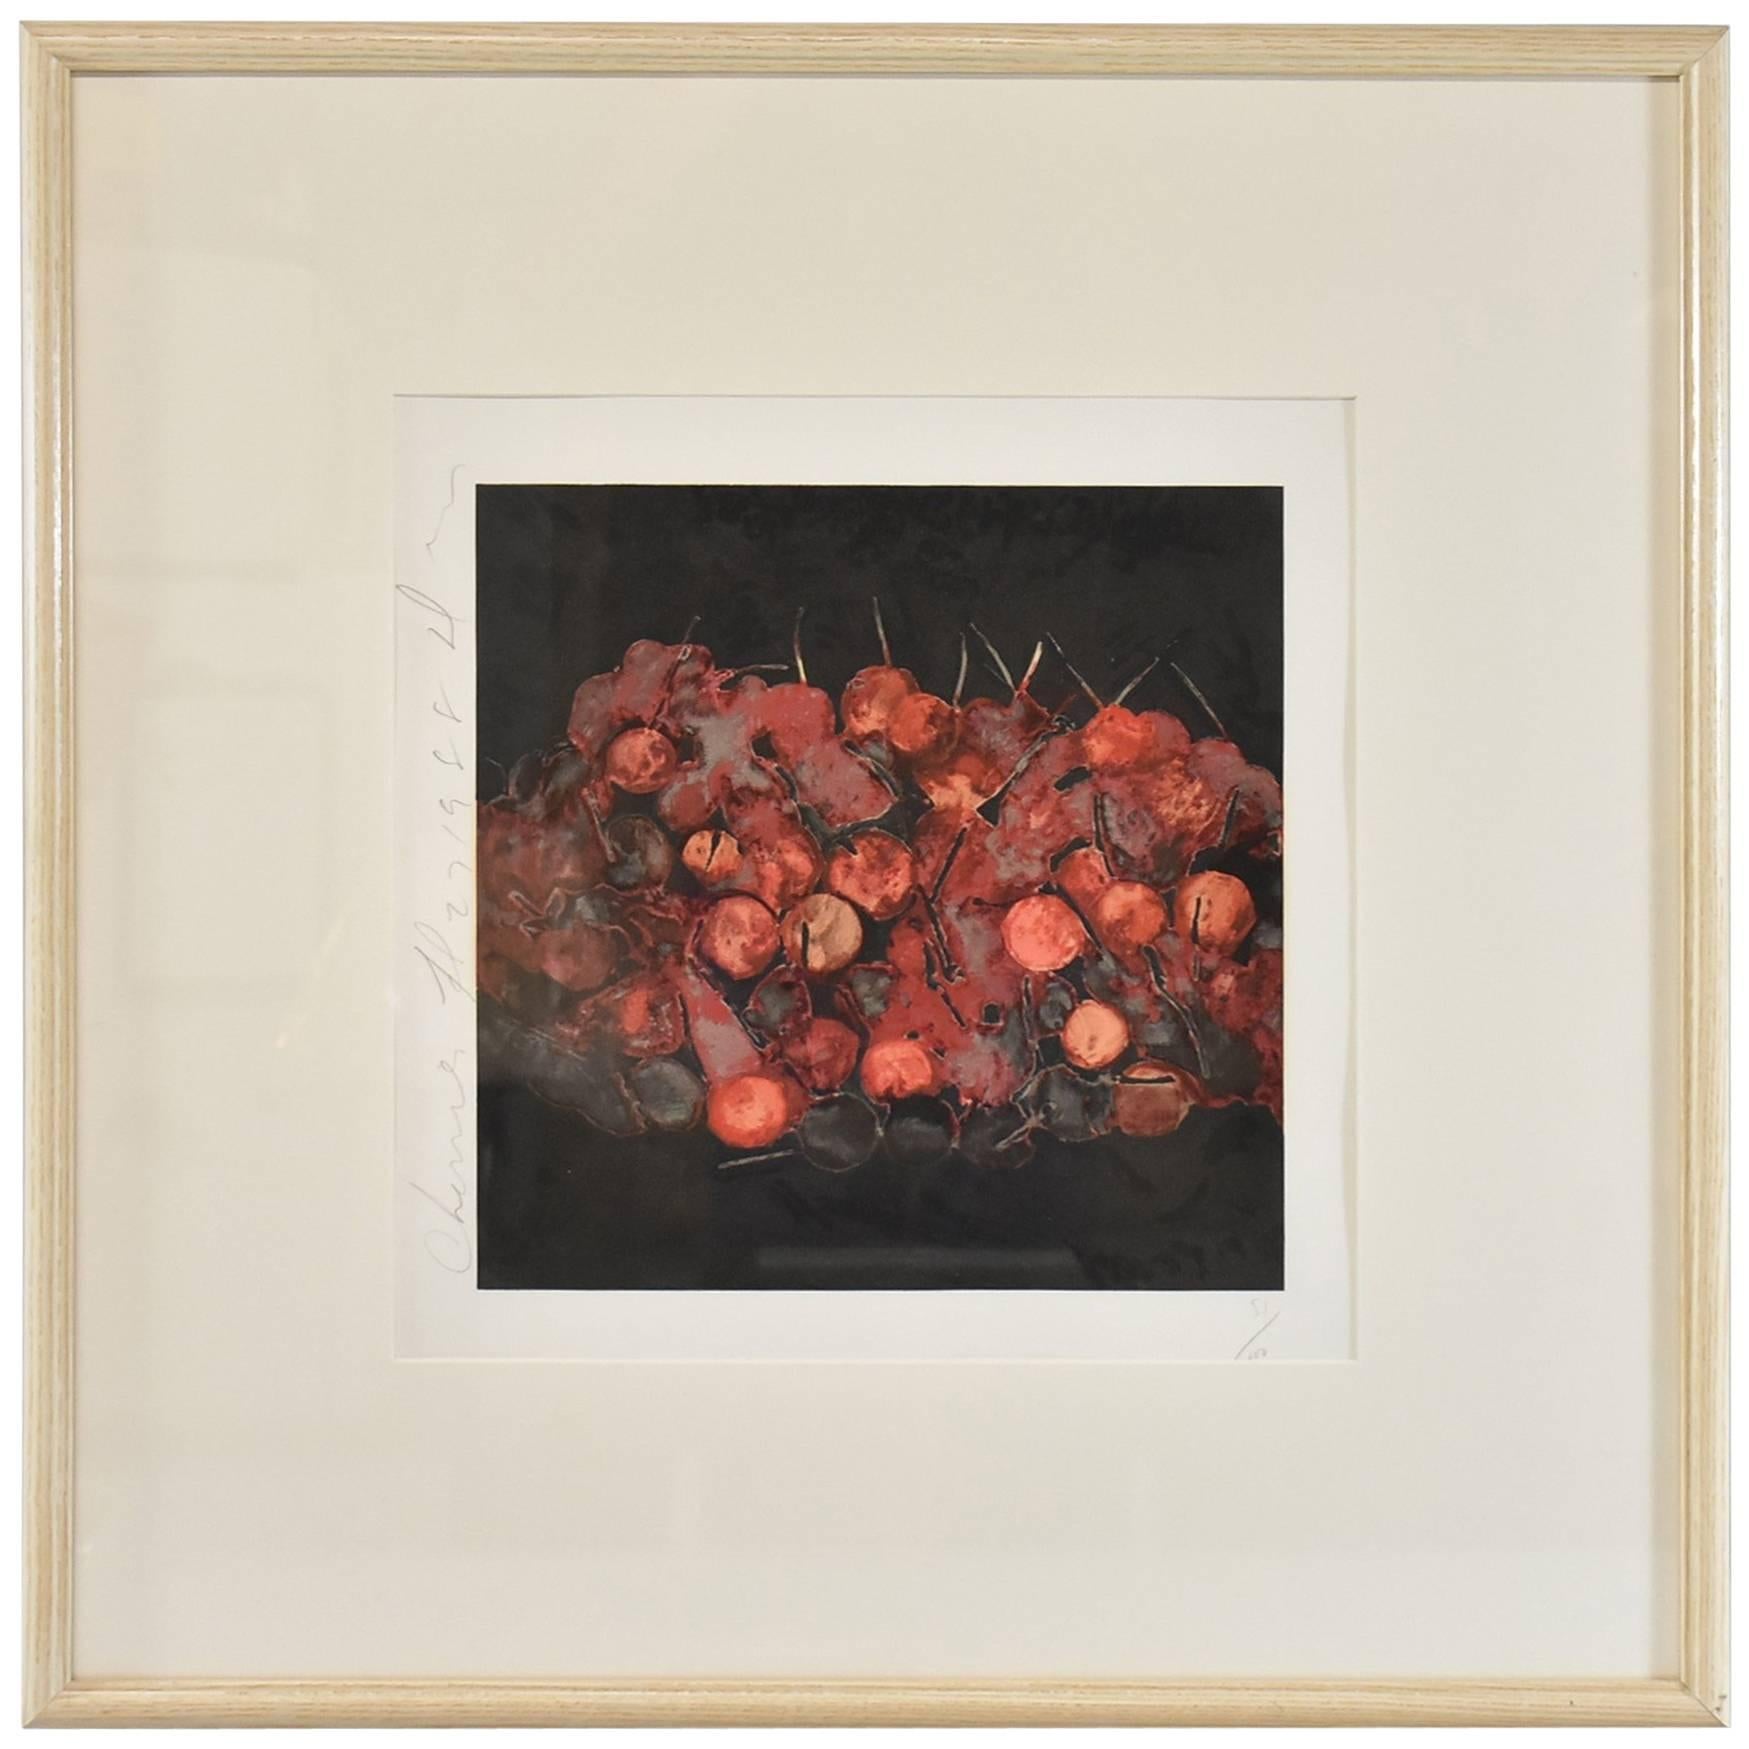 Donald Sultan Print, "Cherries" Signed and Numbered 51/100, 1988